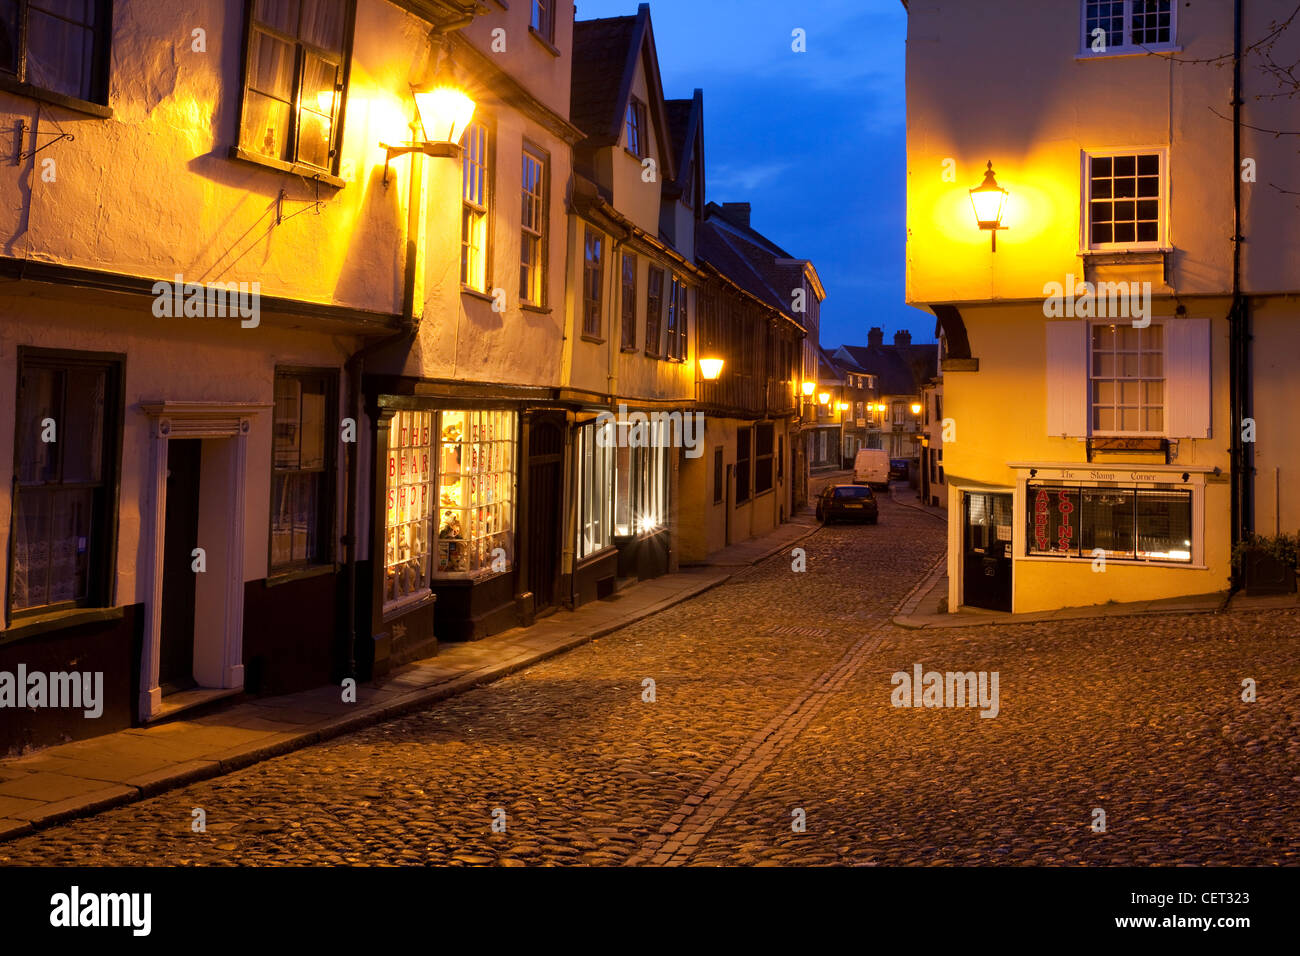 Elm Hill, an historic cobbled lane featuring many buildings from the Tudor period, illuminated at dusk. Stock Photo